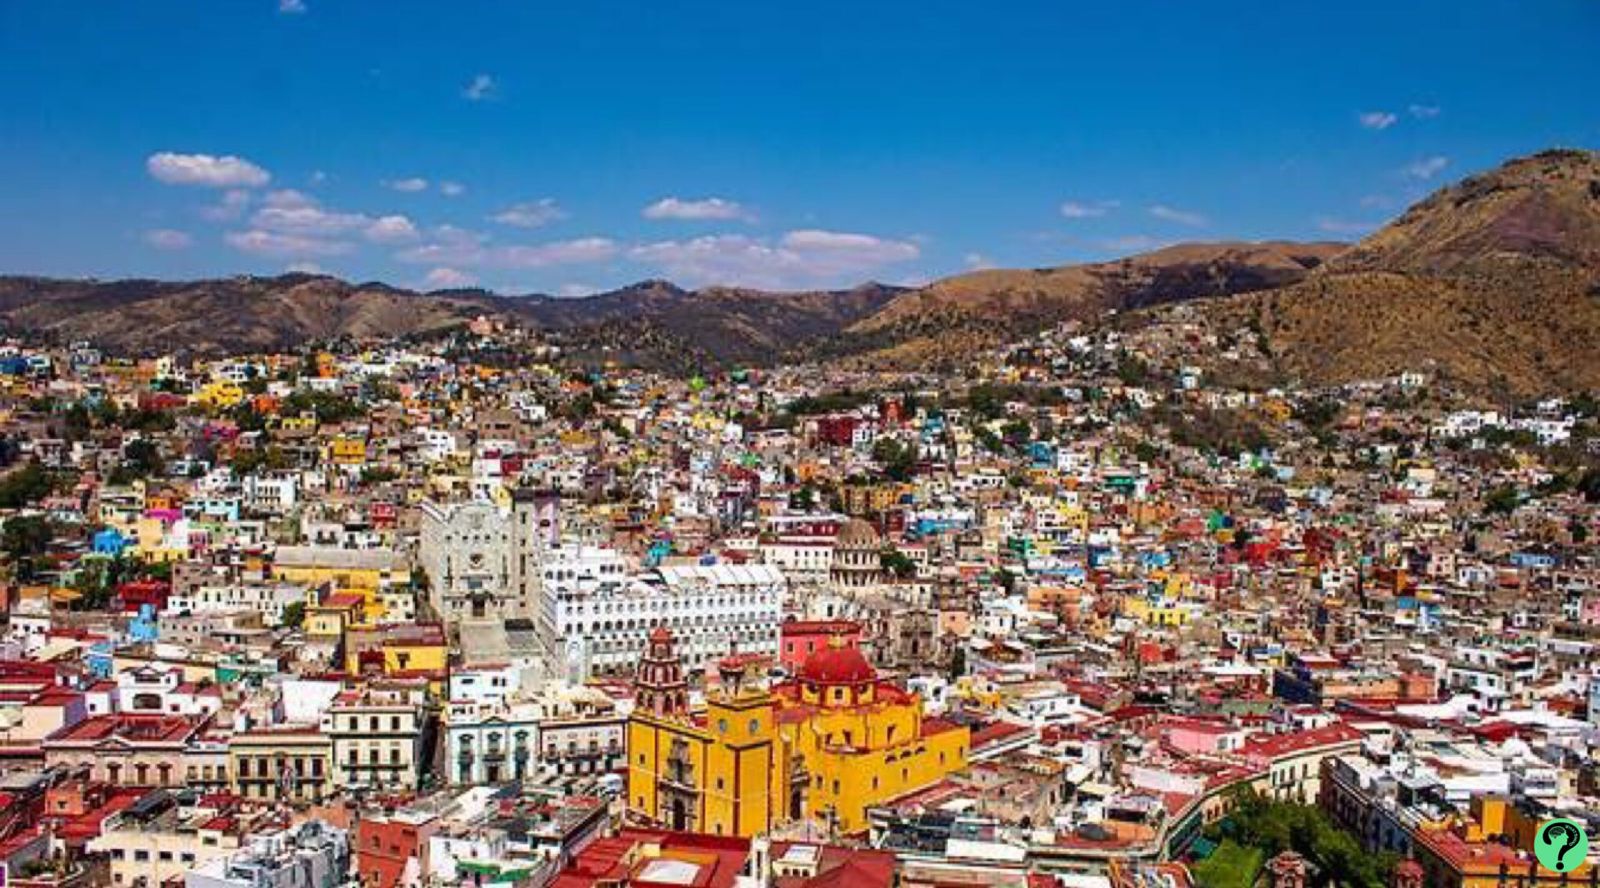 What makes Guanajuato a good industrial property location?